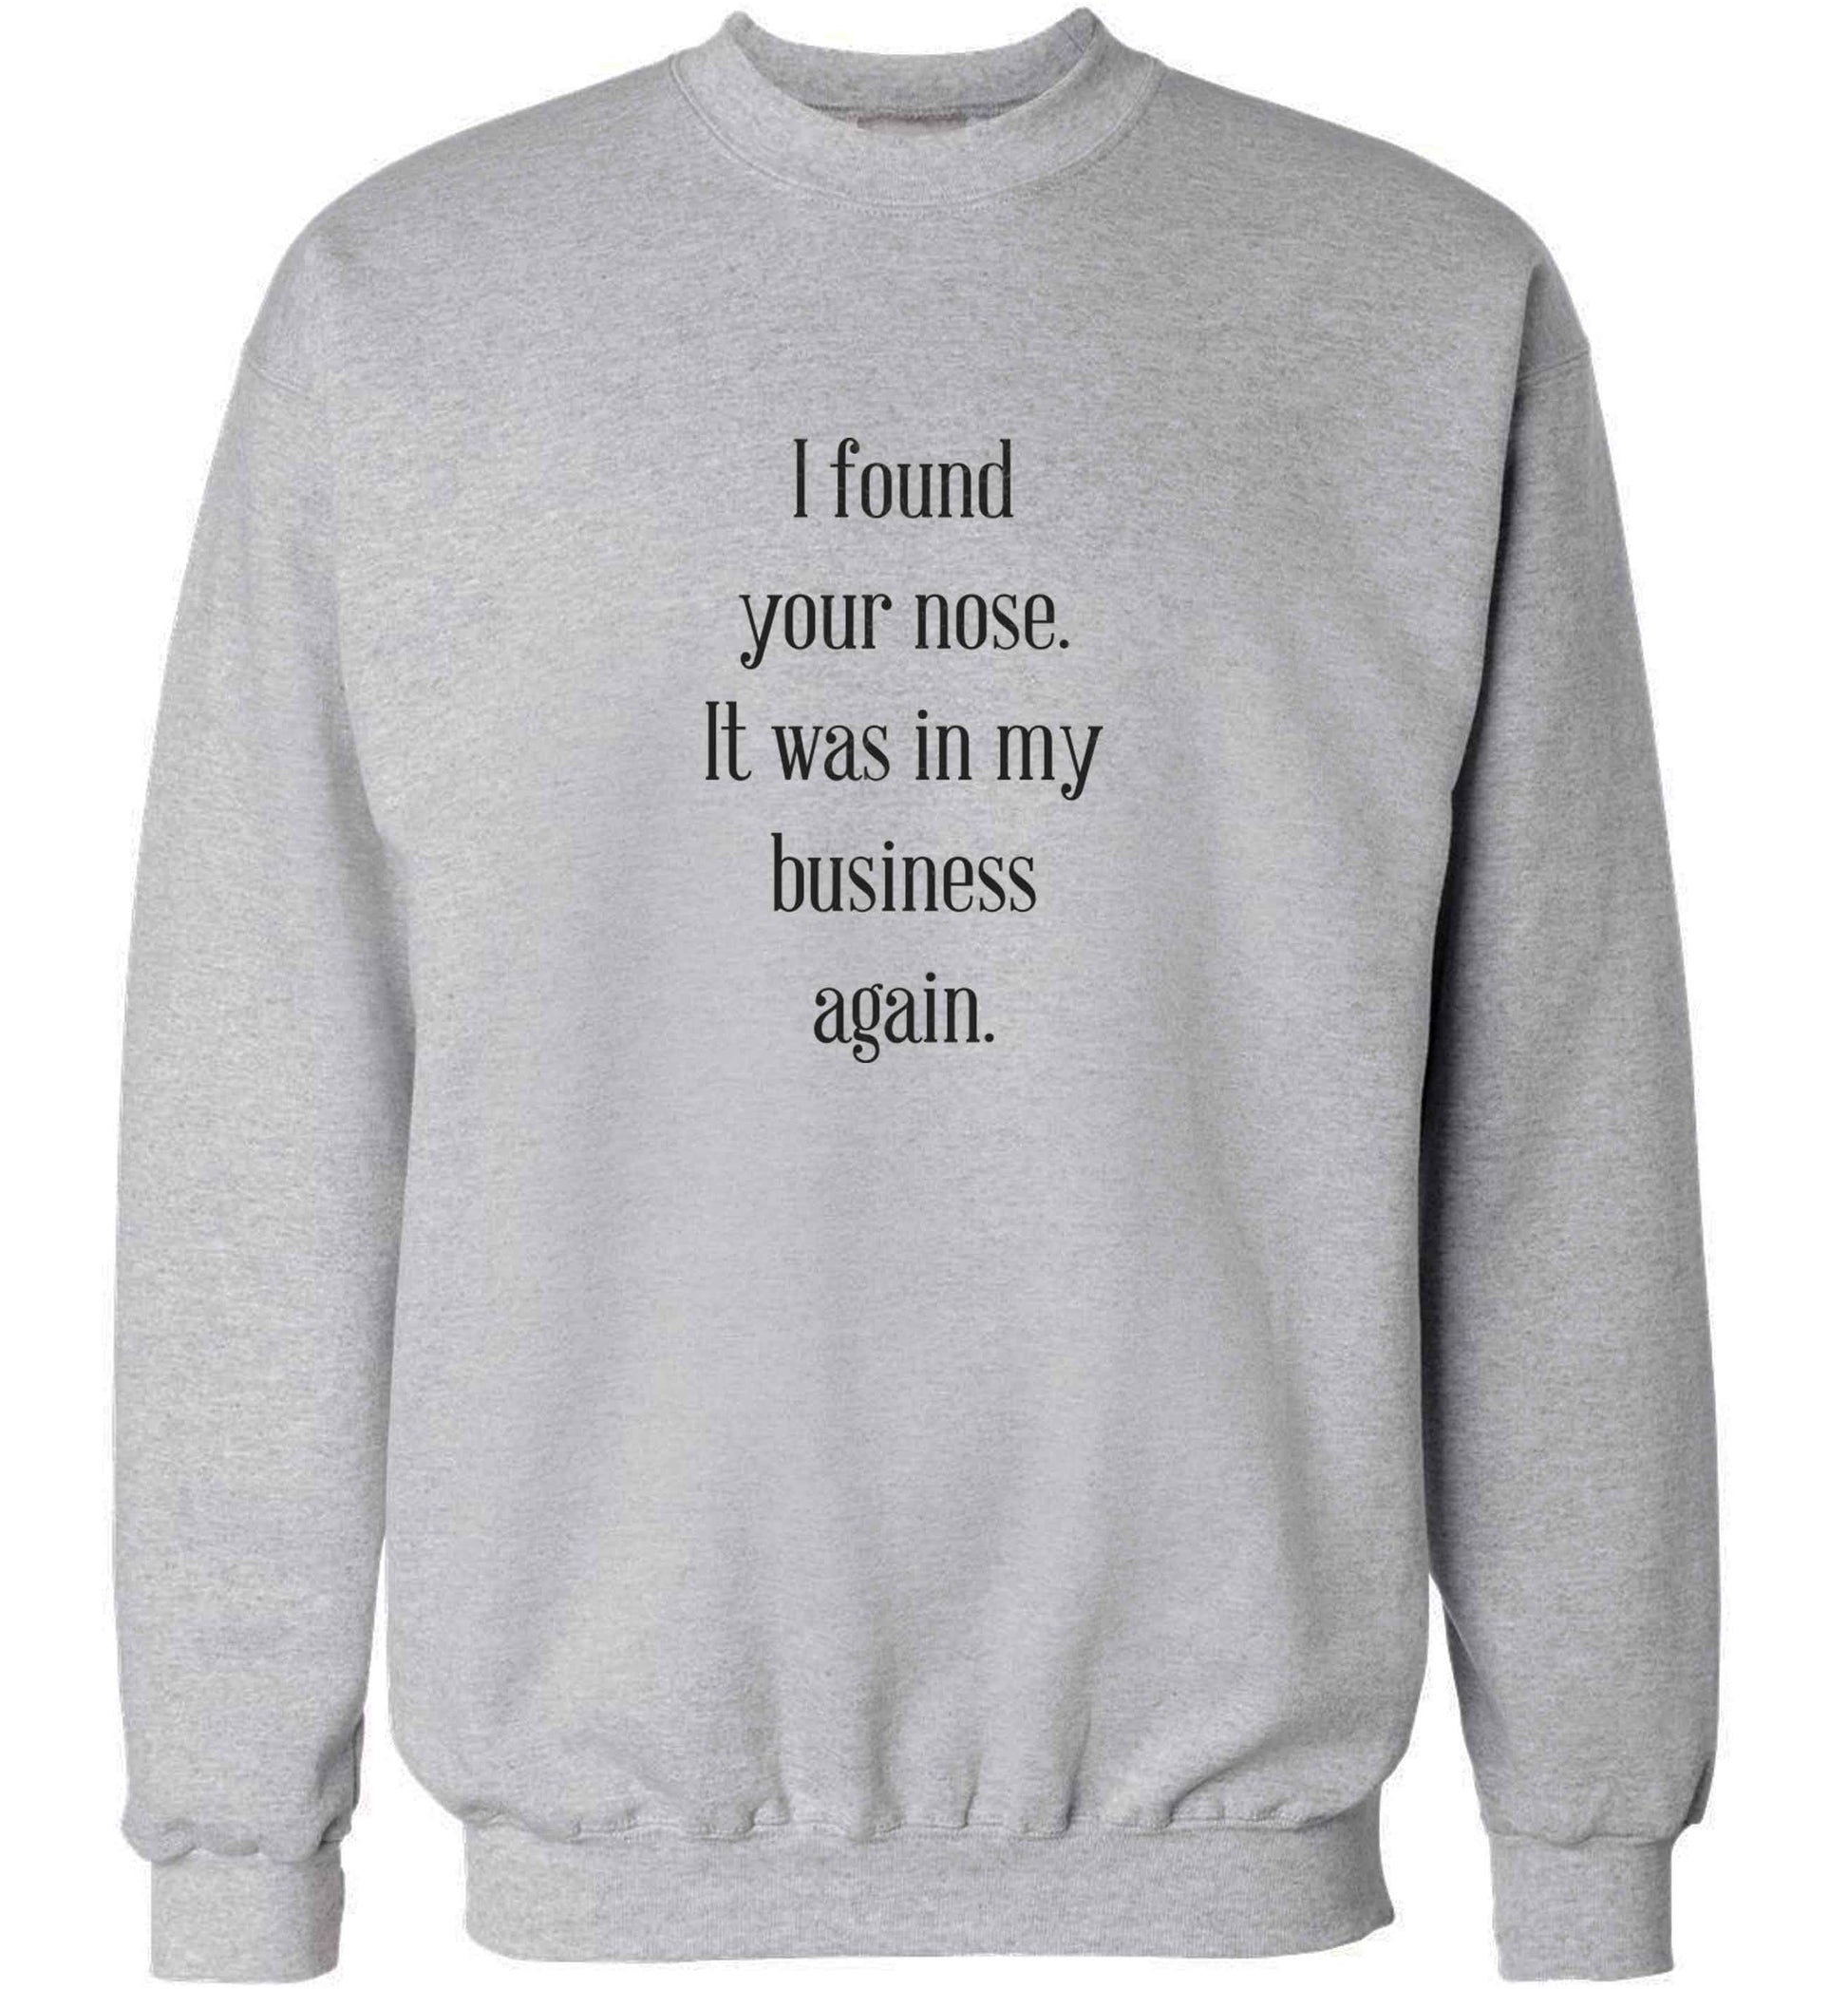 I found your nose it was in my business again adult's unisex grey sweater 2XL